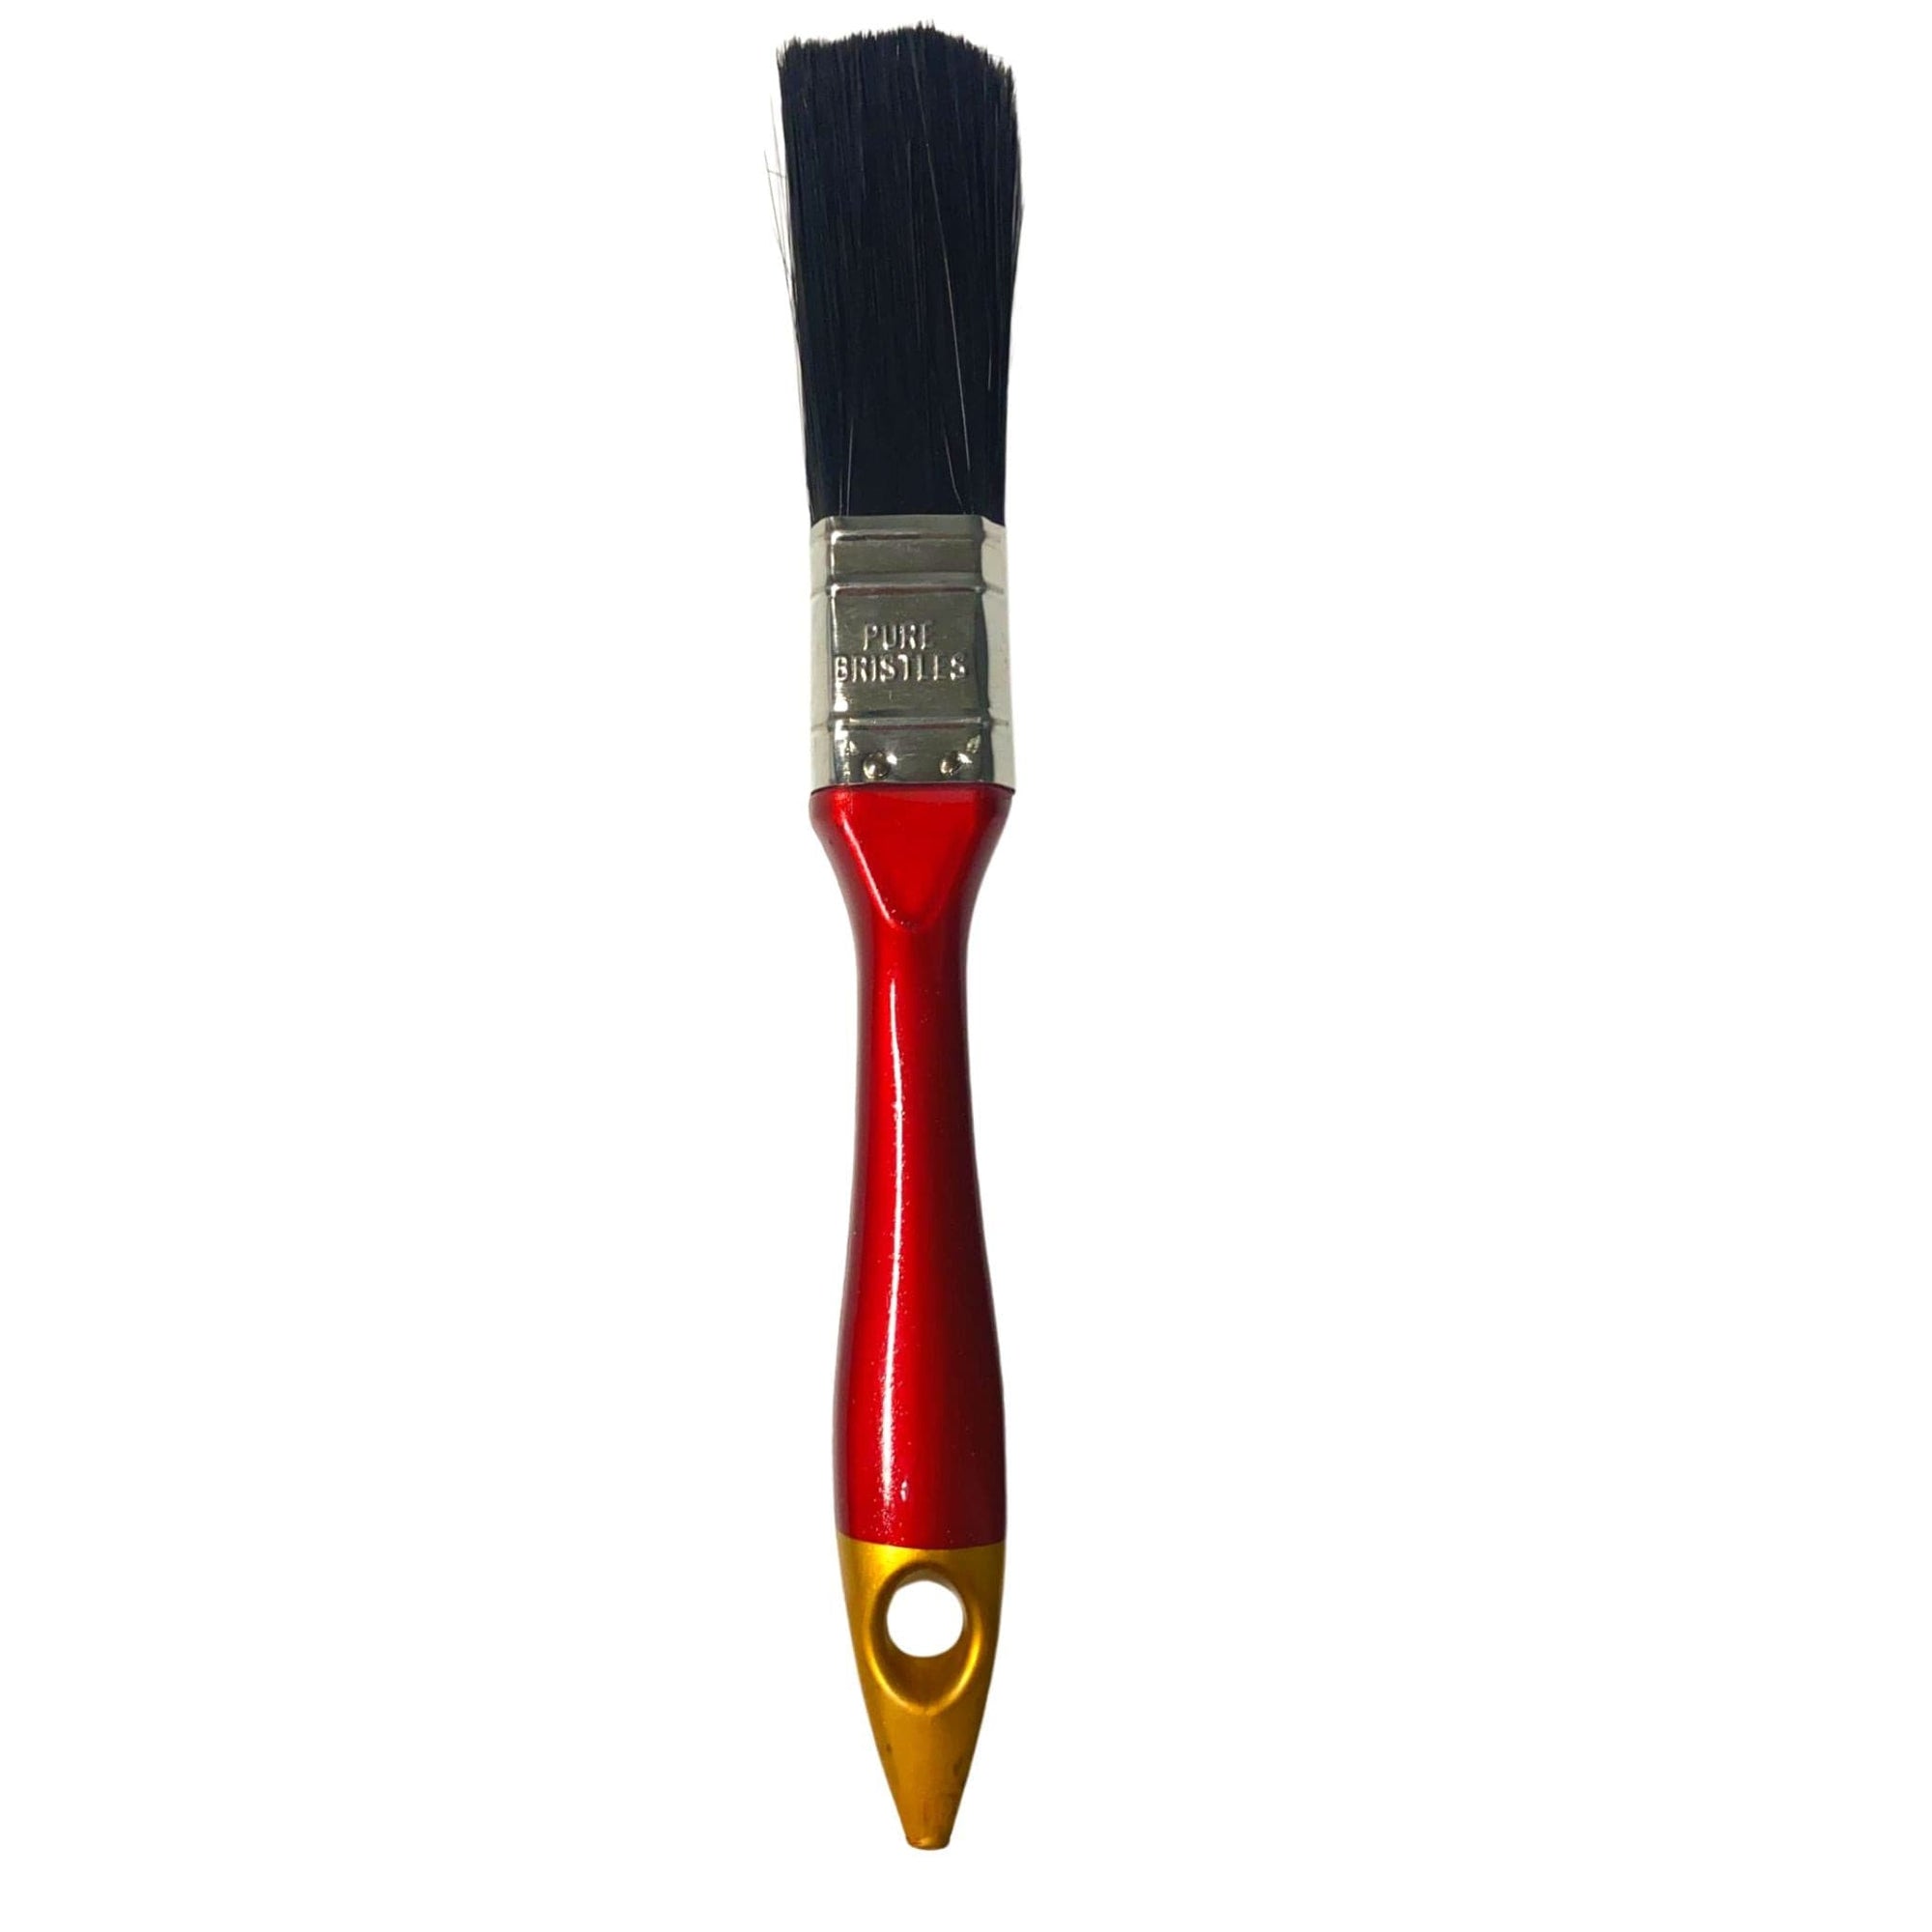 25.4mm (1") Natural Bristle Flat Paint Brush - South East Clearance Centre